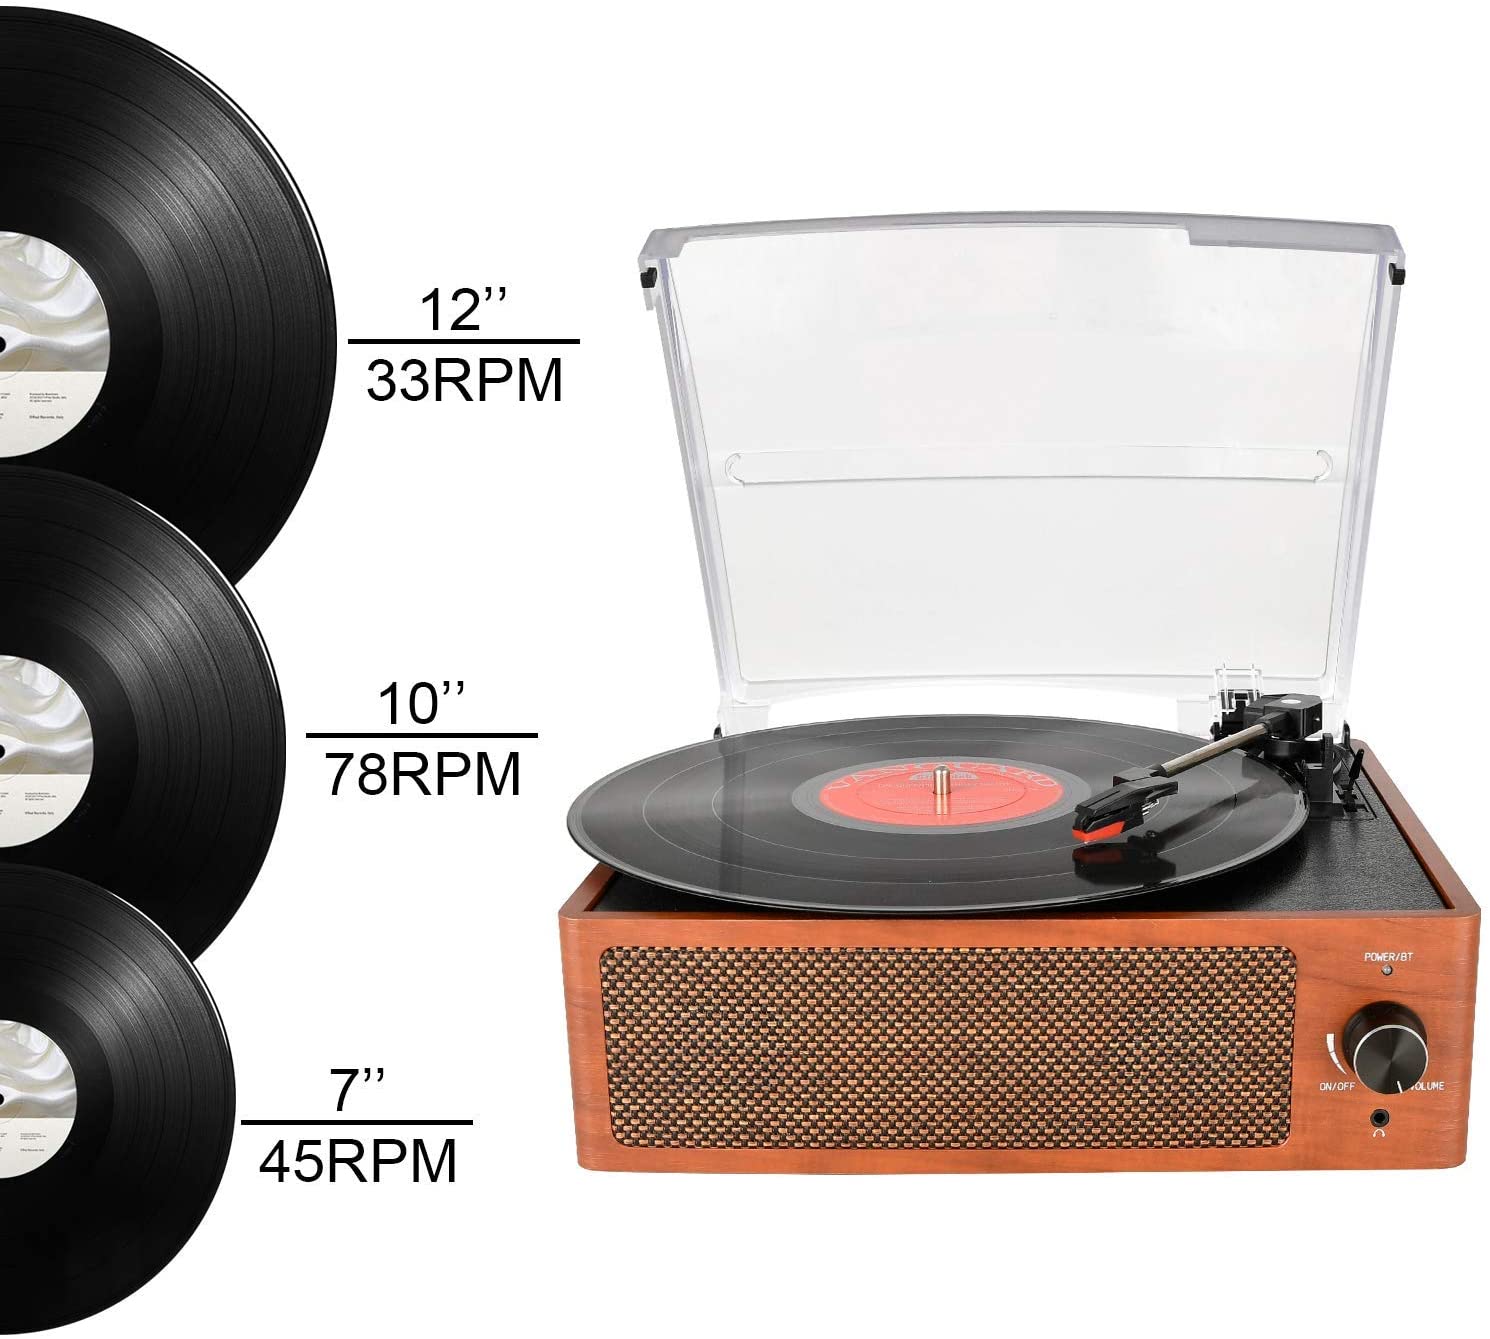 DIGITNOW Bluetooth Record Player Belt-Driven 3-Speed Turntable Built-in  Stereo Speakers - Orange